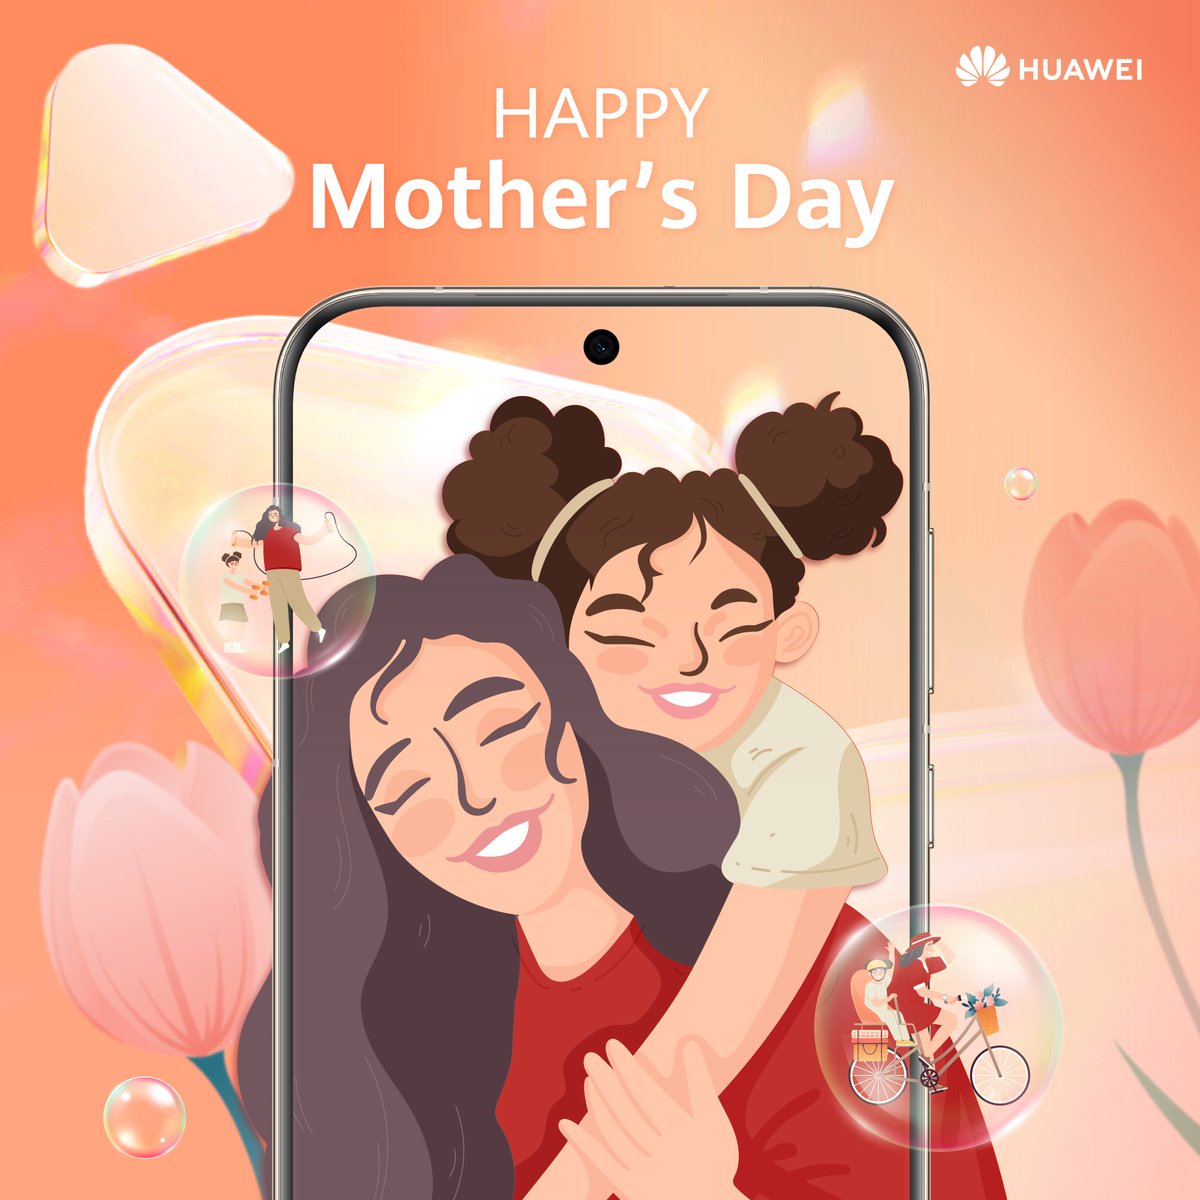 Happy Mother's Day to all the amazing moms out there! 💐 Treat her to the perfect gift this Mother's Day with the stylish and sophisticated HUAWEI Pura 70. Let her capture every precious moment with elegance and ease. 

#HUAWEI #HUAWEIMY #MothersDay #HUAWEIPura70 #FashionForward